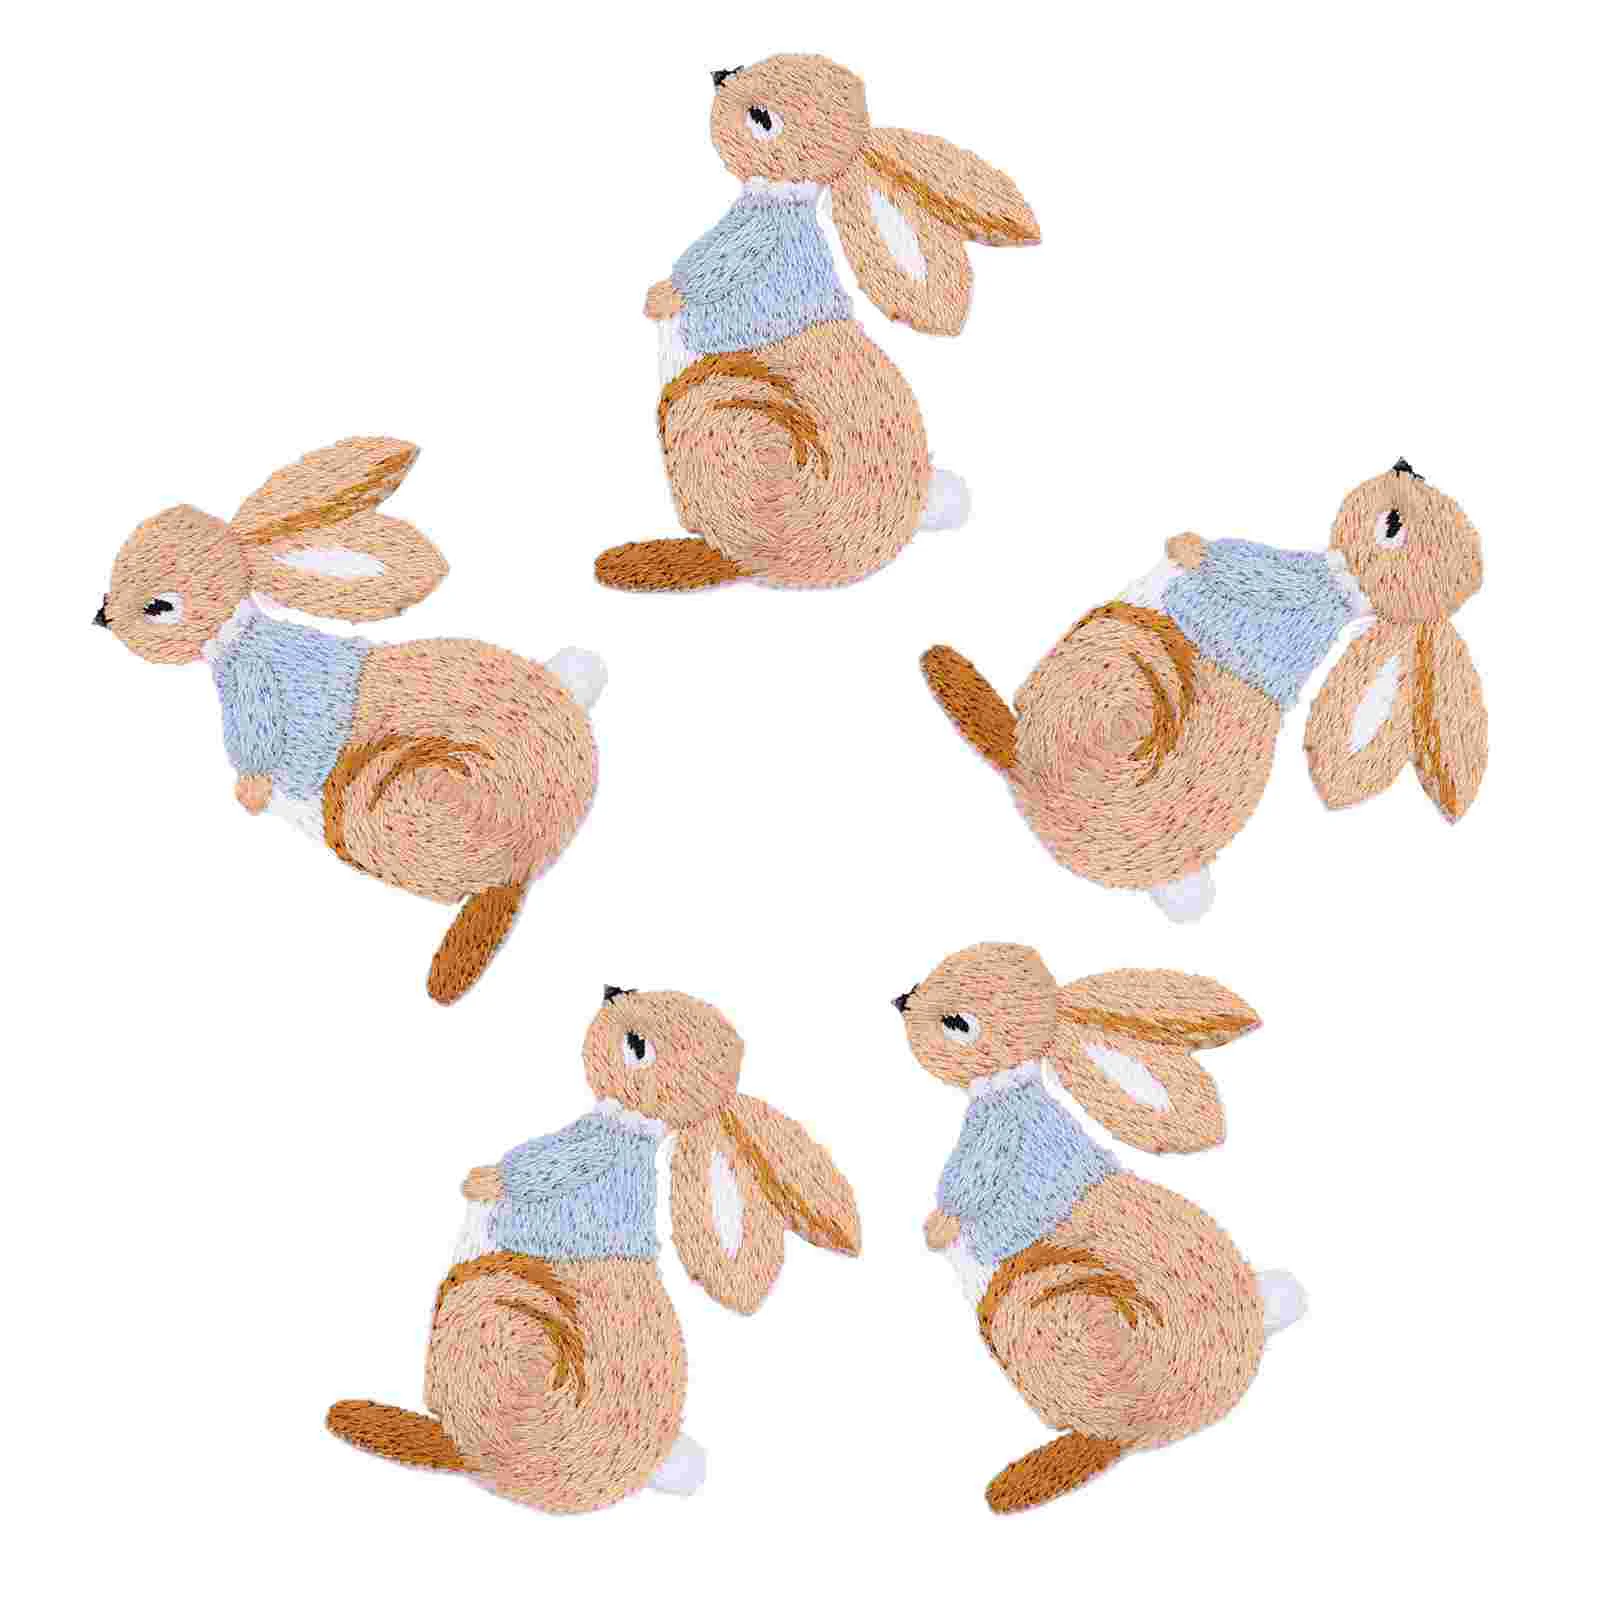 

Patches Applique Patch Embroidered Iron Sew Embroidery Bunny Cloth Rabbit Clothing Repair Diy Badges Clothes Sewing Easter Decor